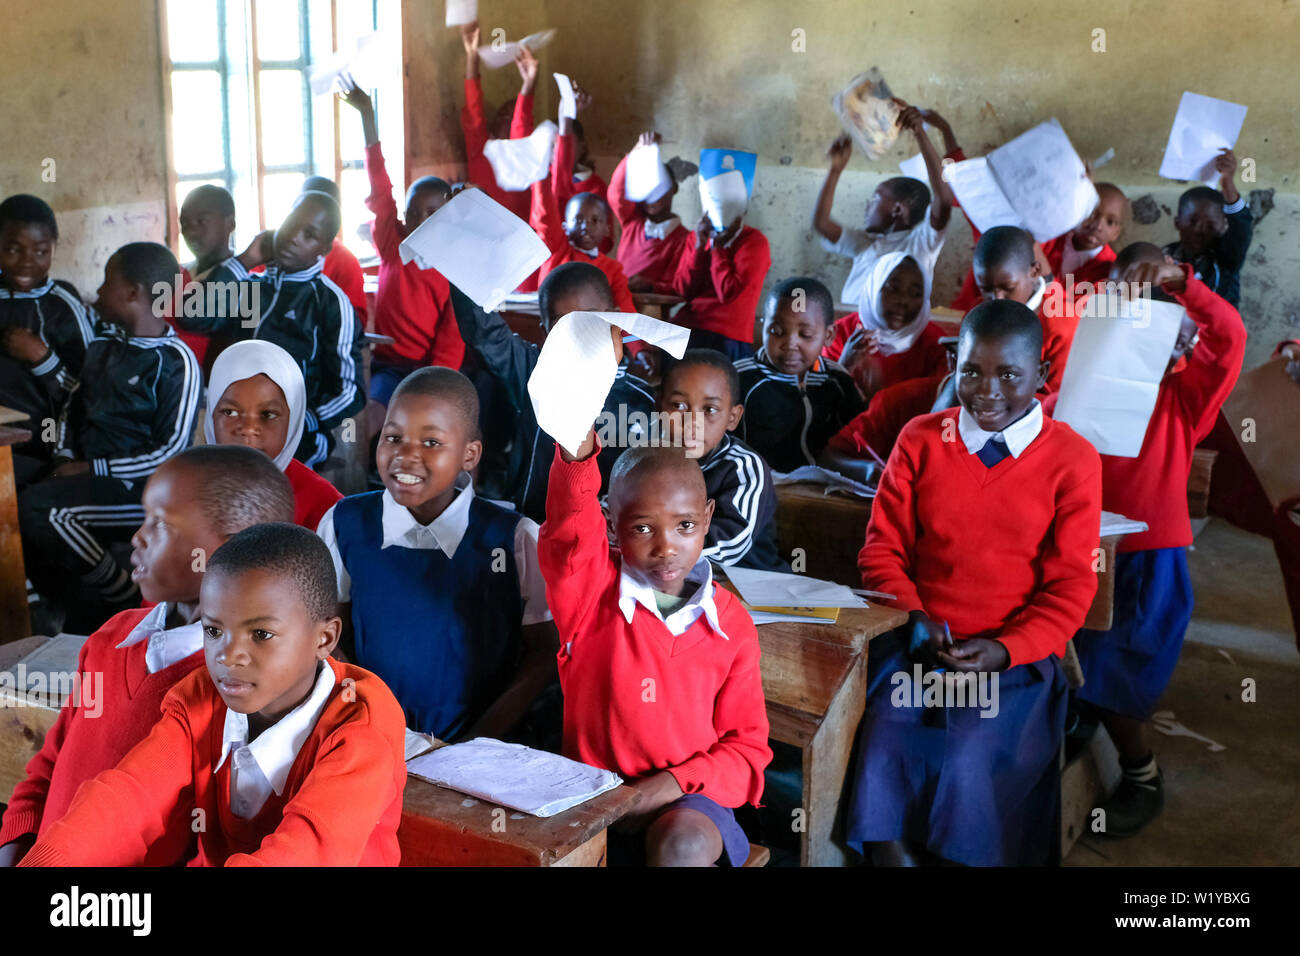 Students in red school uniforms in a school class of the Mwenge Primary School in Mbeya, Tanzania Stock Photo